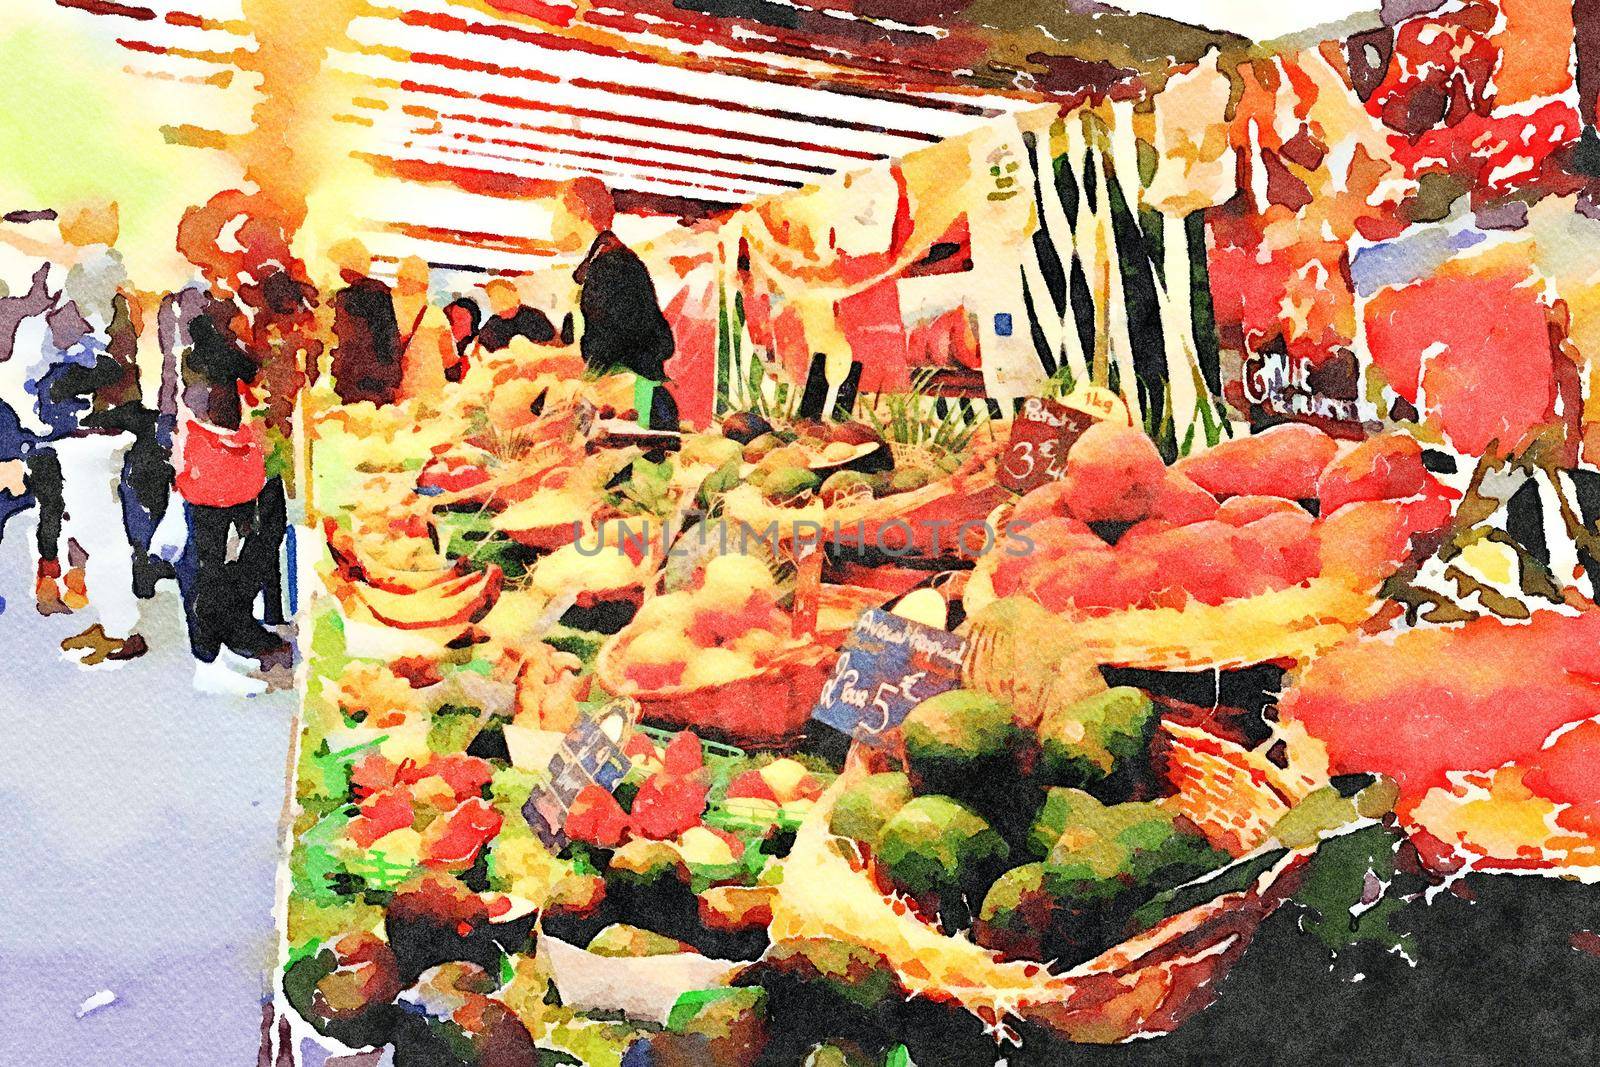 watercolor representing a scene from the open-air food market in Paris